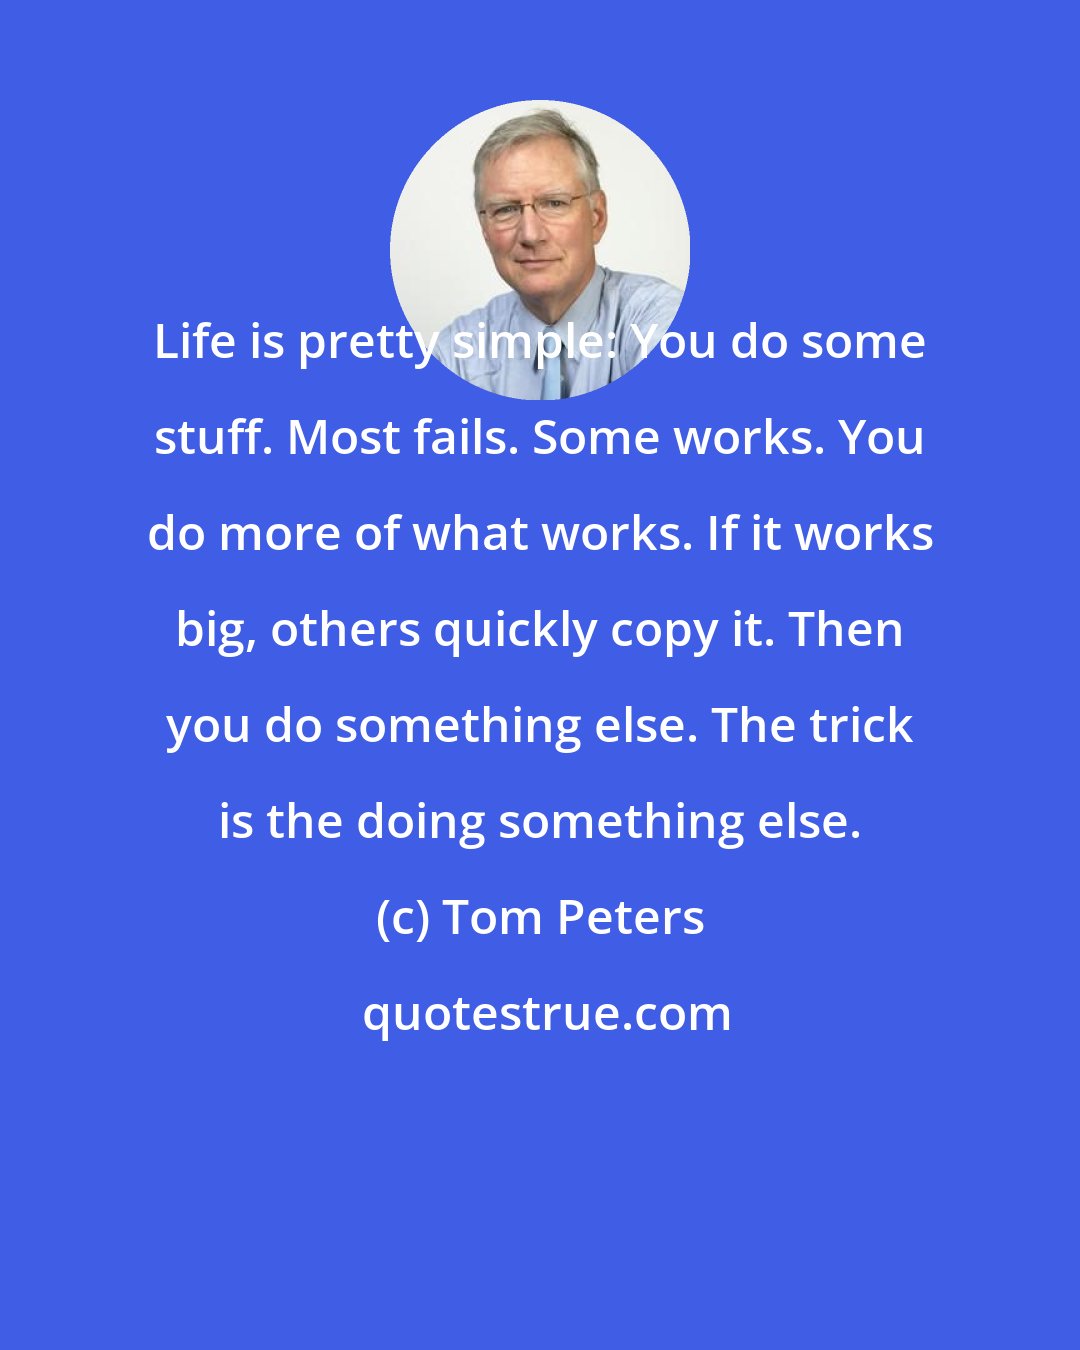 Tom Peters: Life is pretty simple: You do some stuff. Most fails. Some works. You do more of what works. If it works big, others quickly copy it. Then you do something else. The trick is the doing something else.